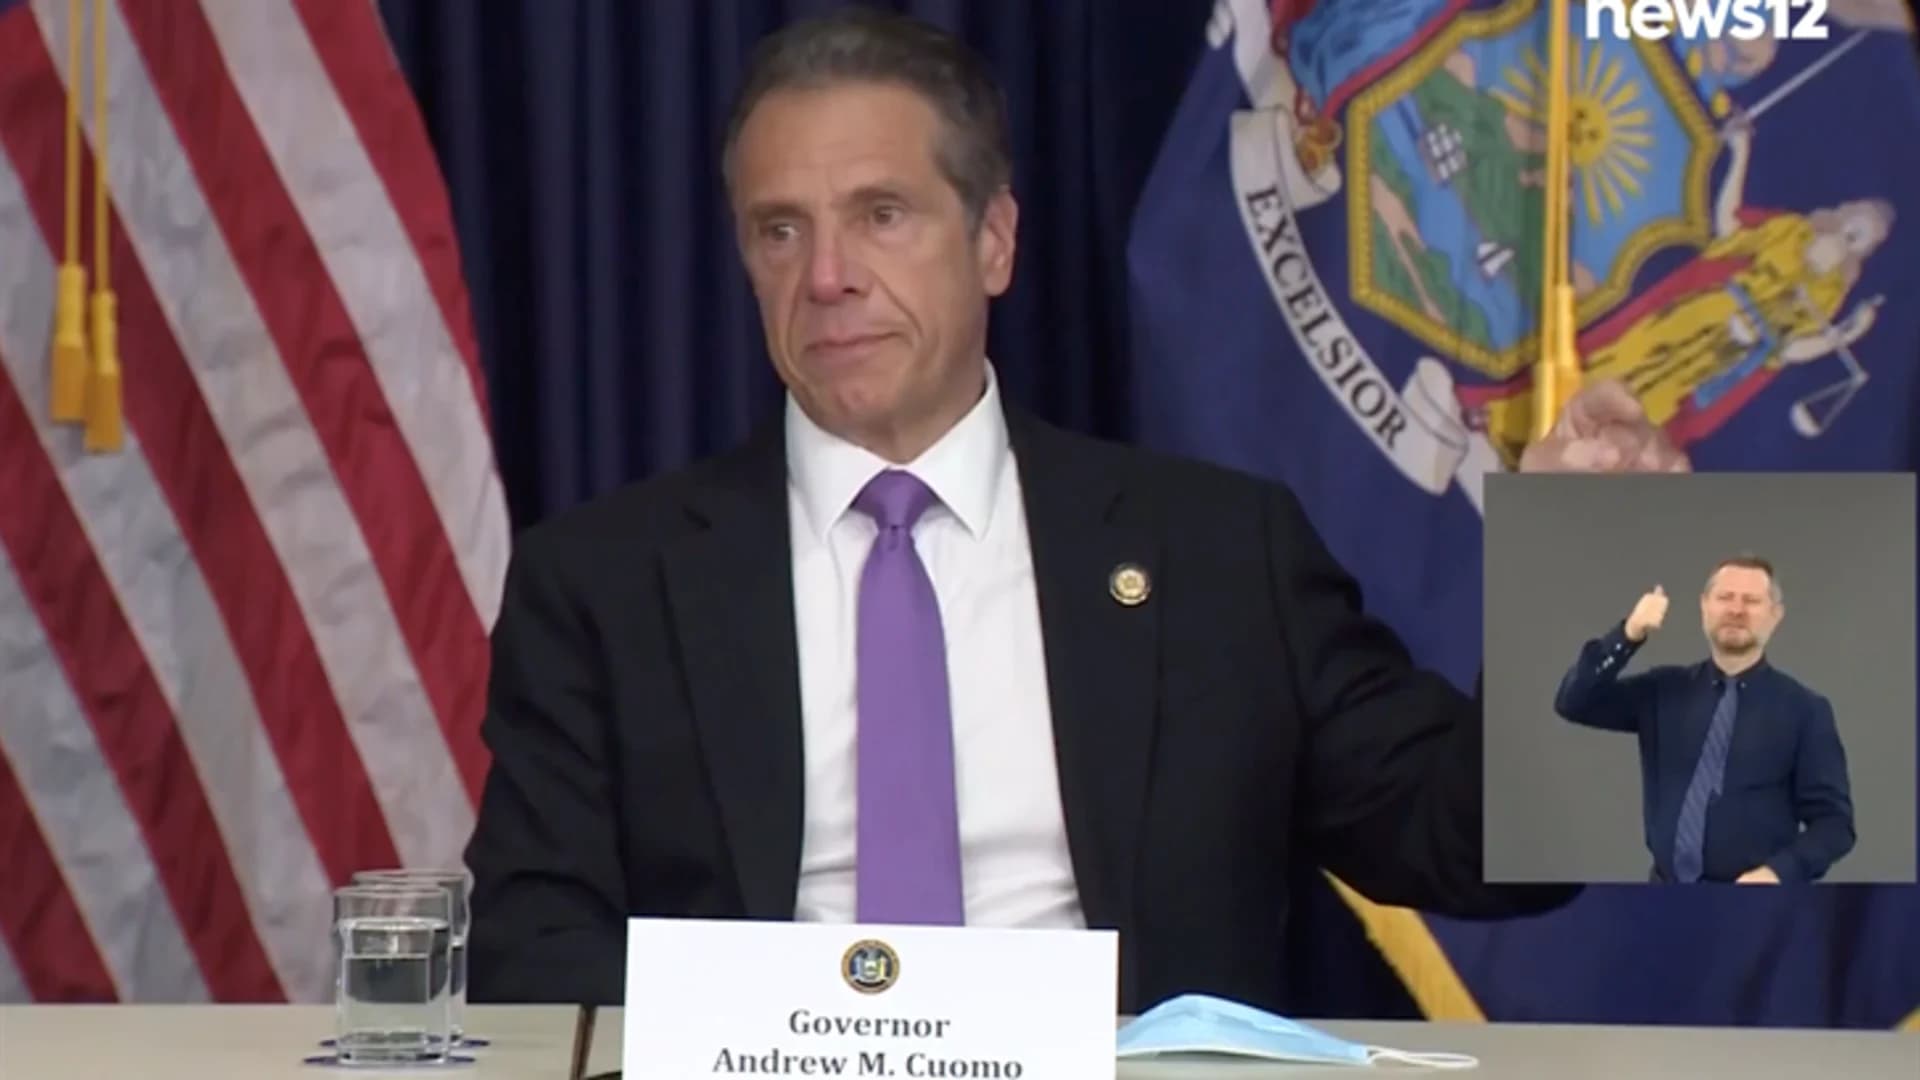 Cuomo urges NYers to 'stay smart' as NYC enters Phase 1, says 35,000 daily tests will help keep 'close eye' on city